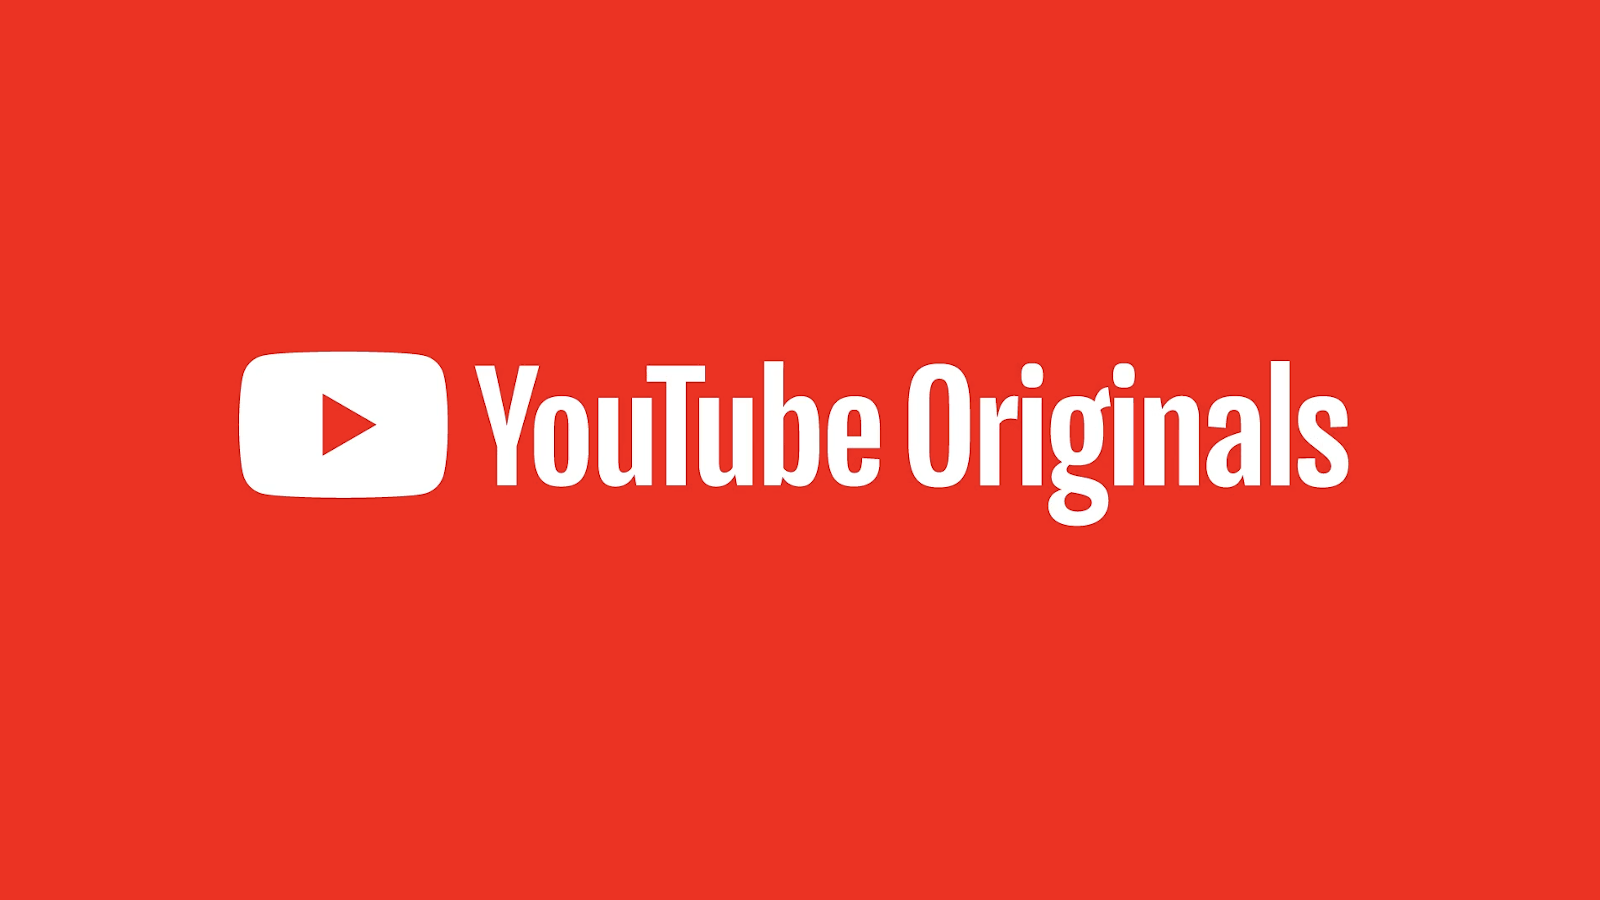 YouTube Originals Will Be Free to Watch Starting September 24th